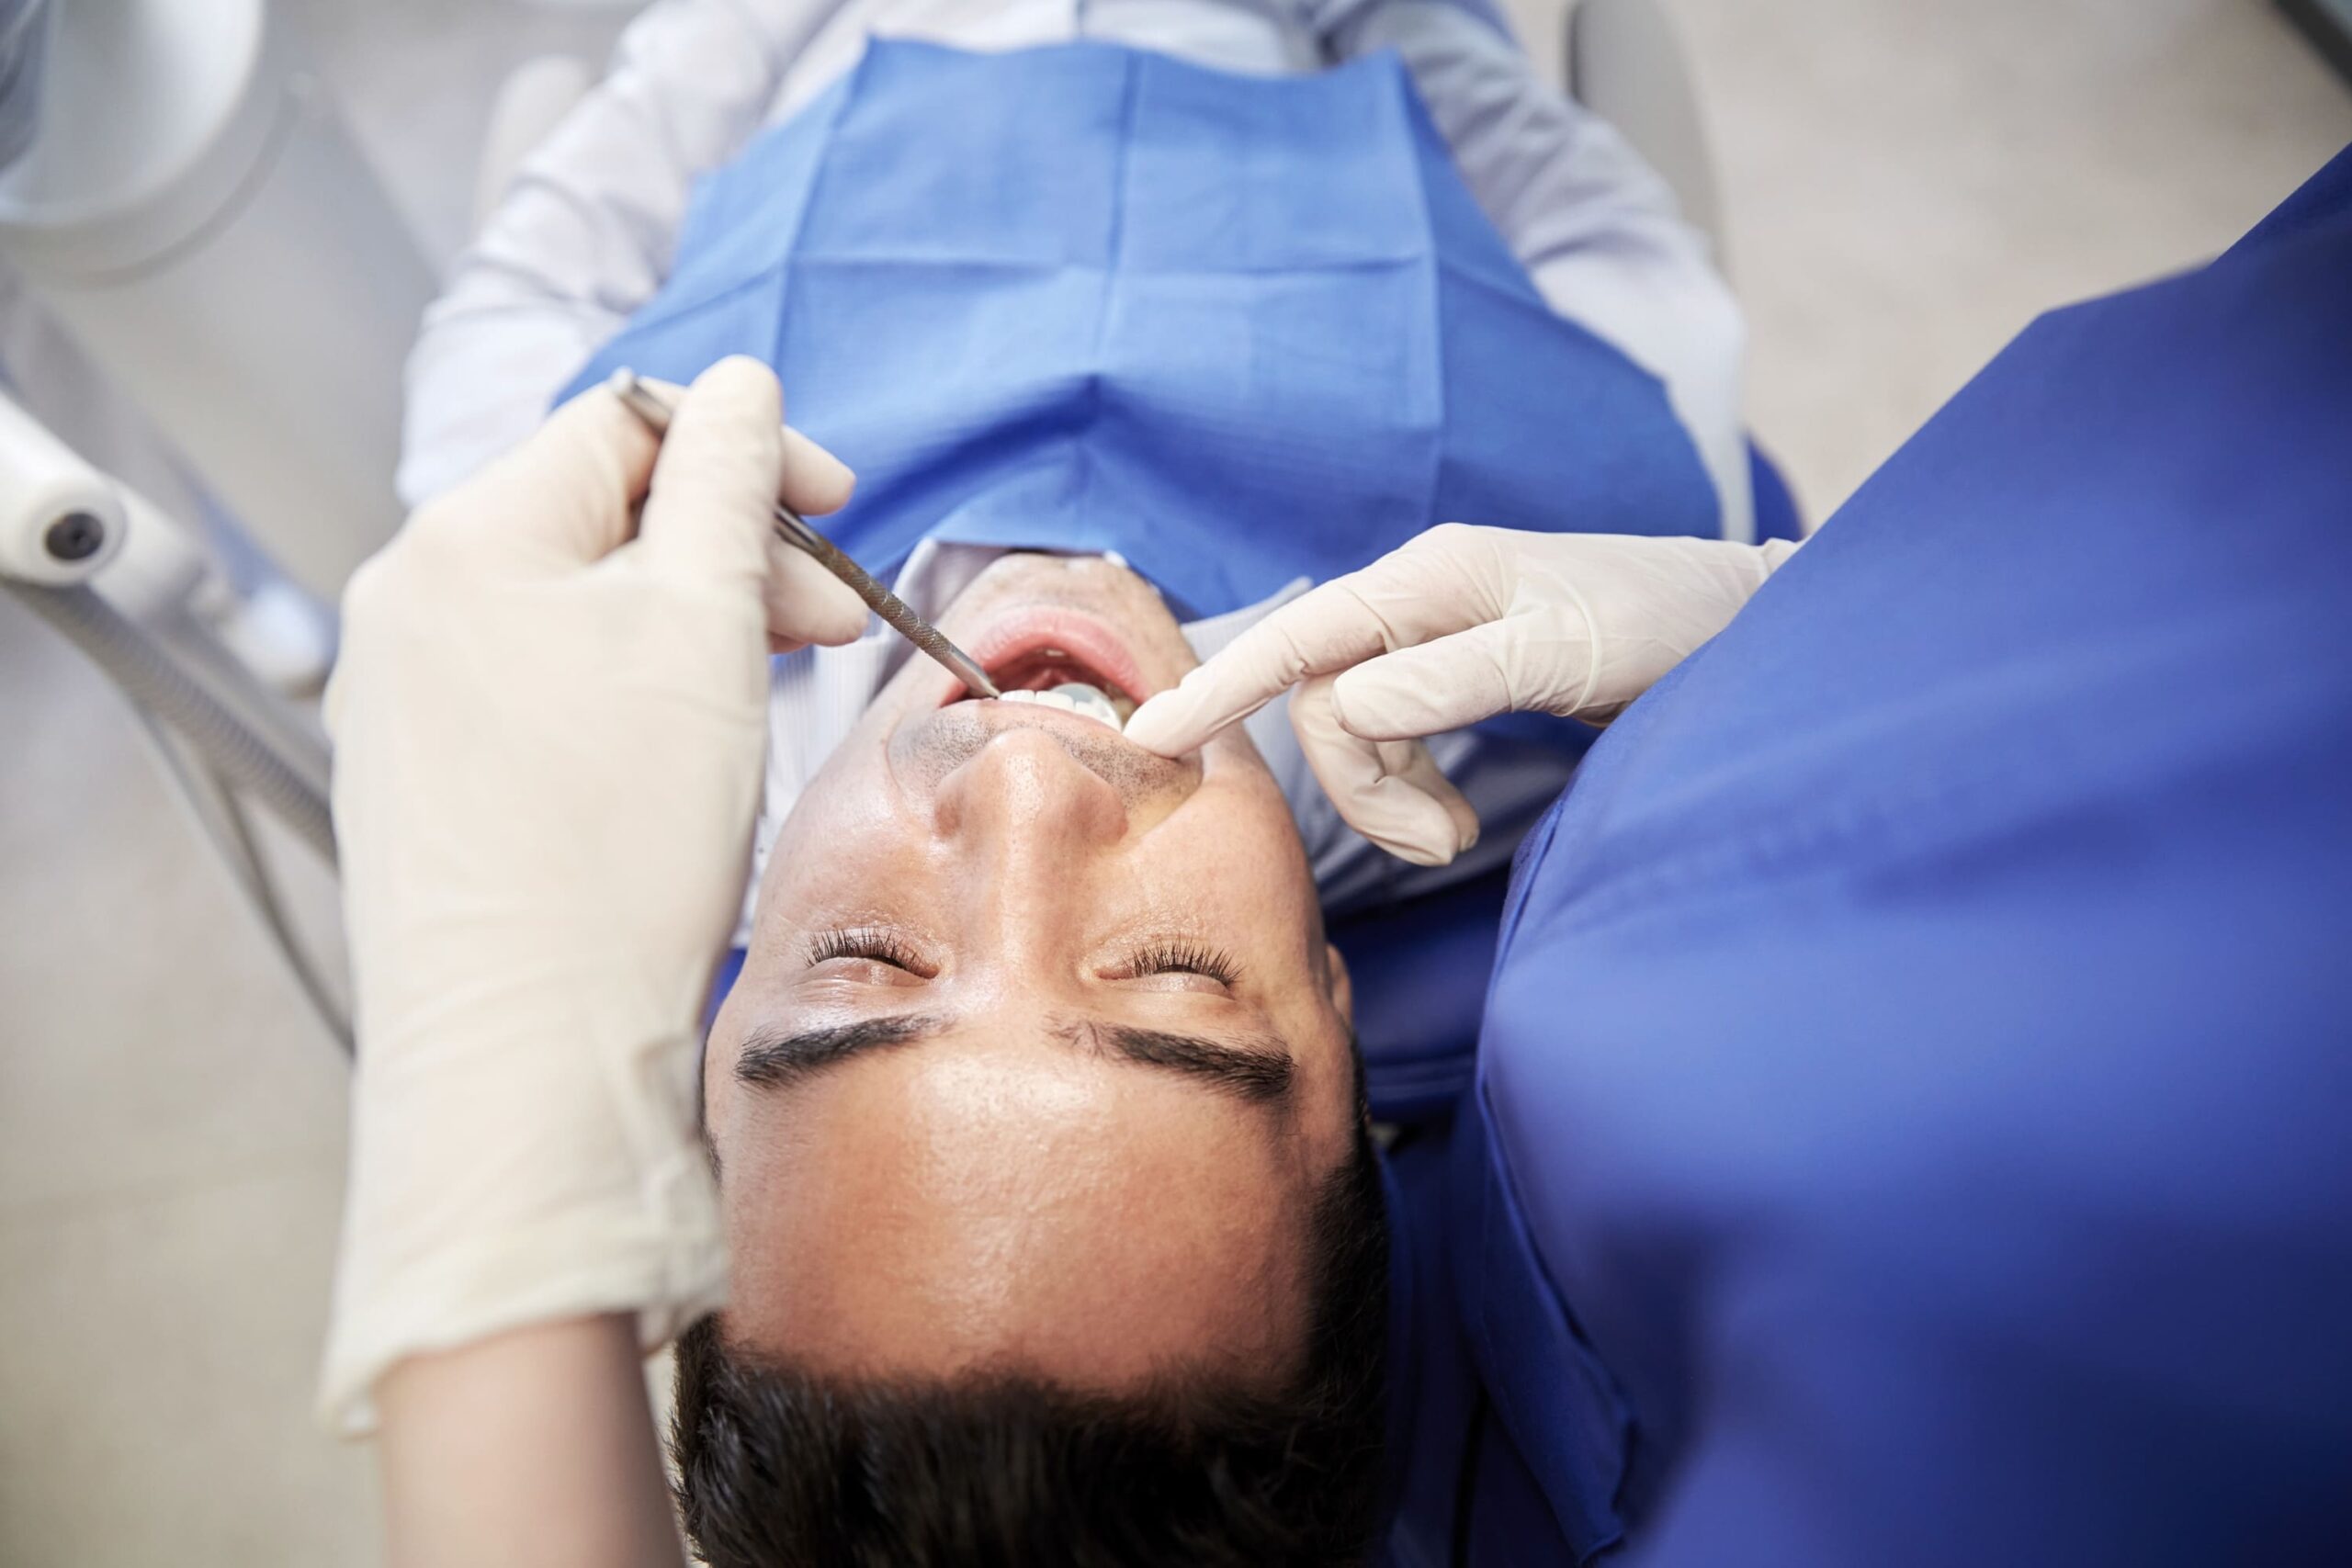 How Sedation Dentistry Benefits Those with Special Needs